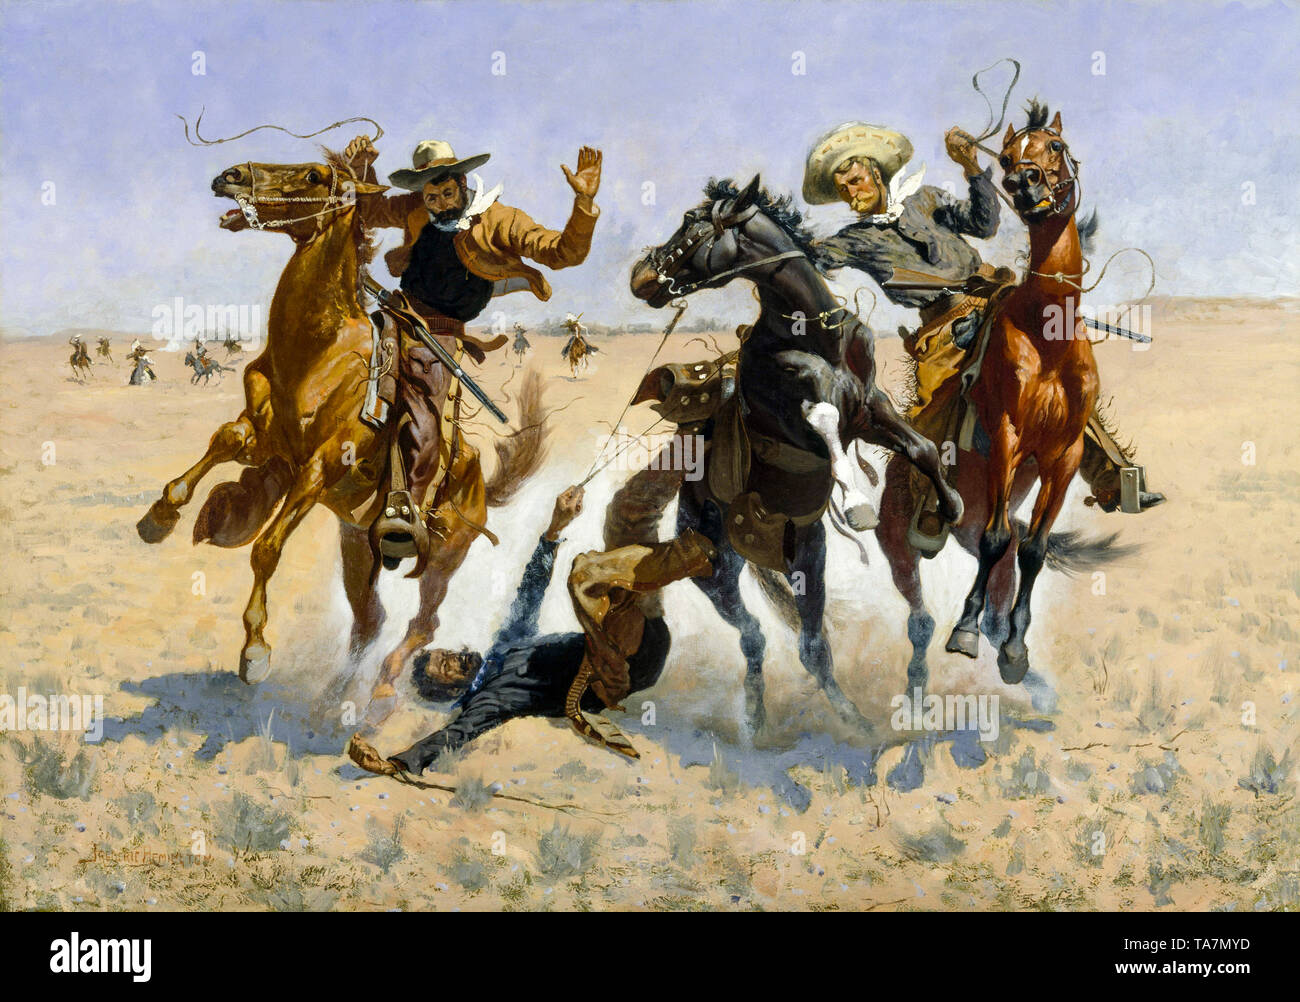 Frederic Remington, Aiding a Comrade, Wild West painting, 1890 Stock Photo